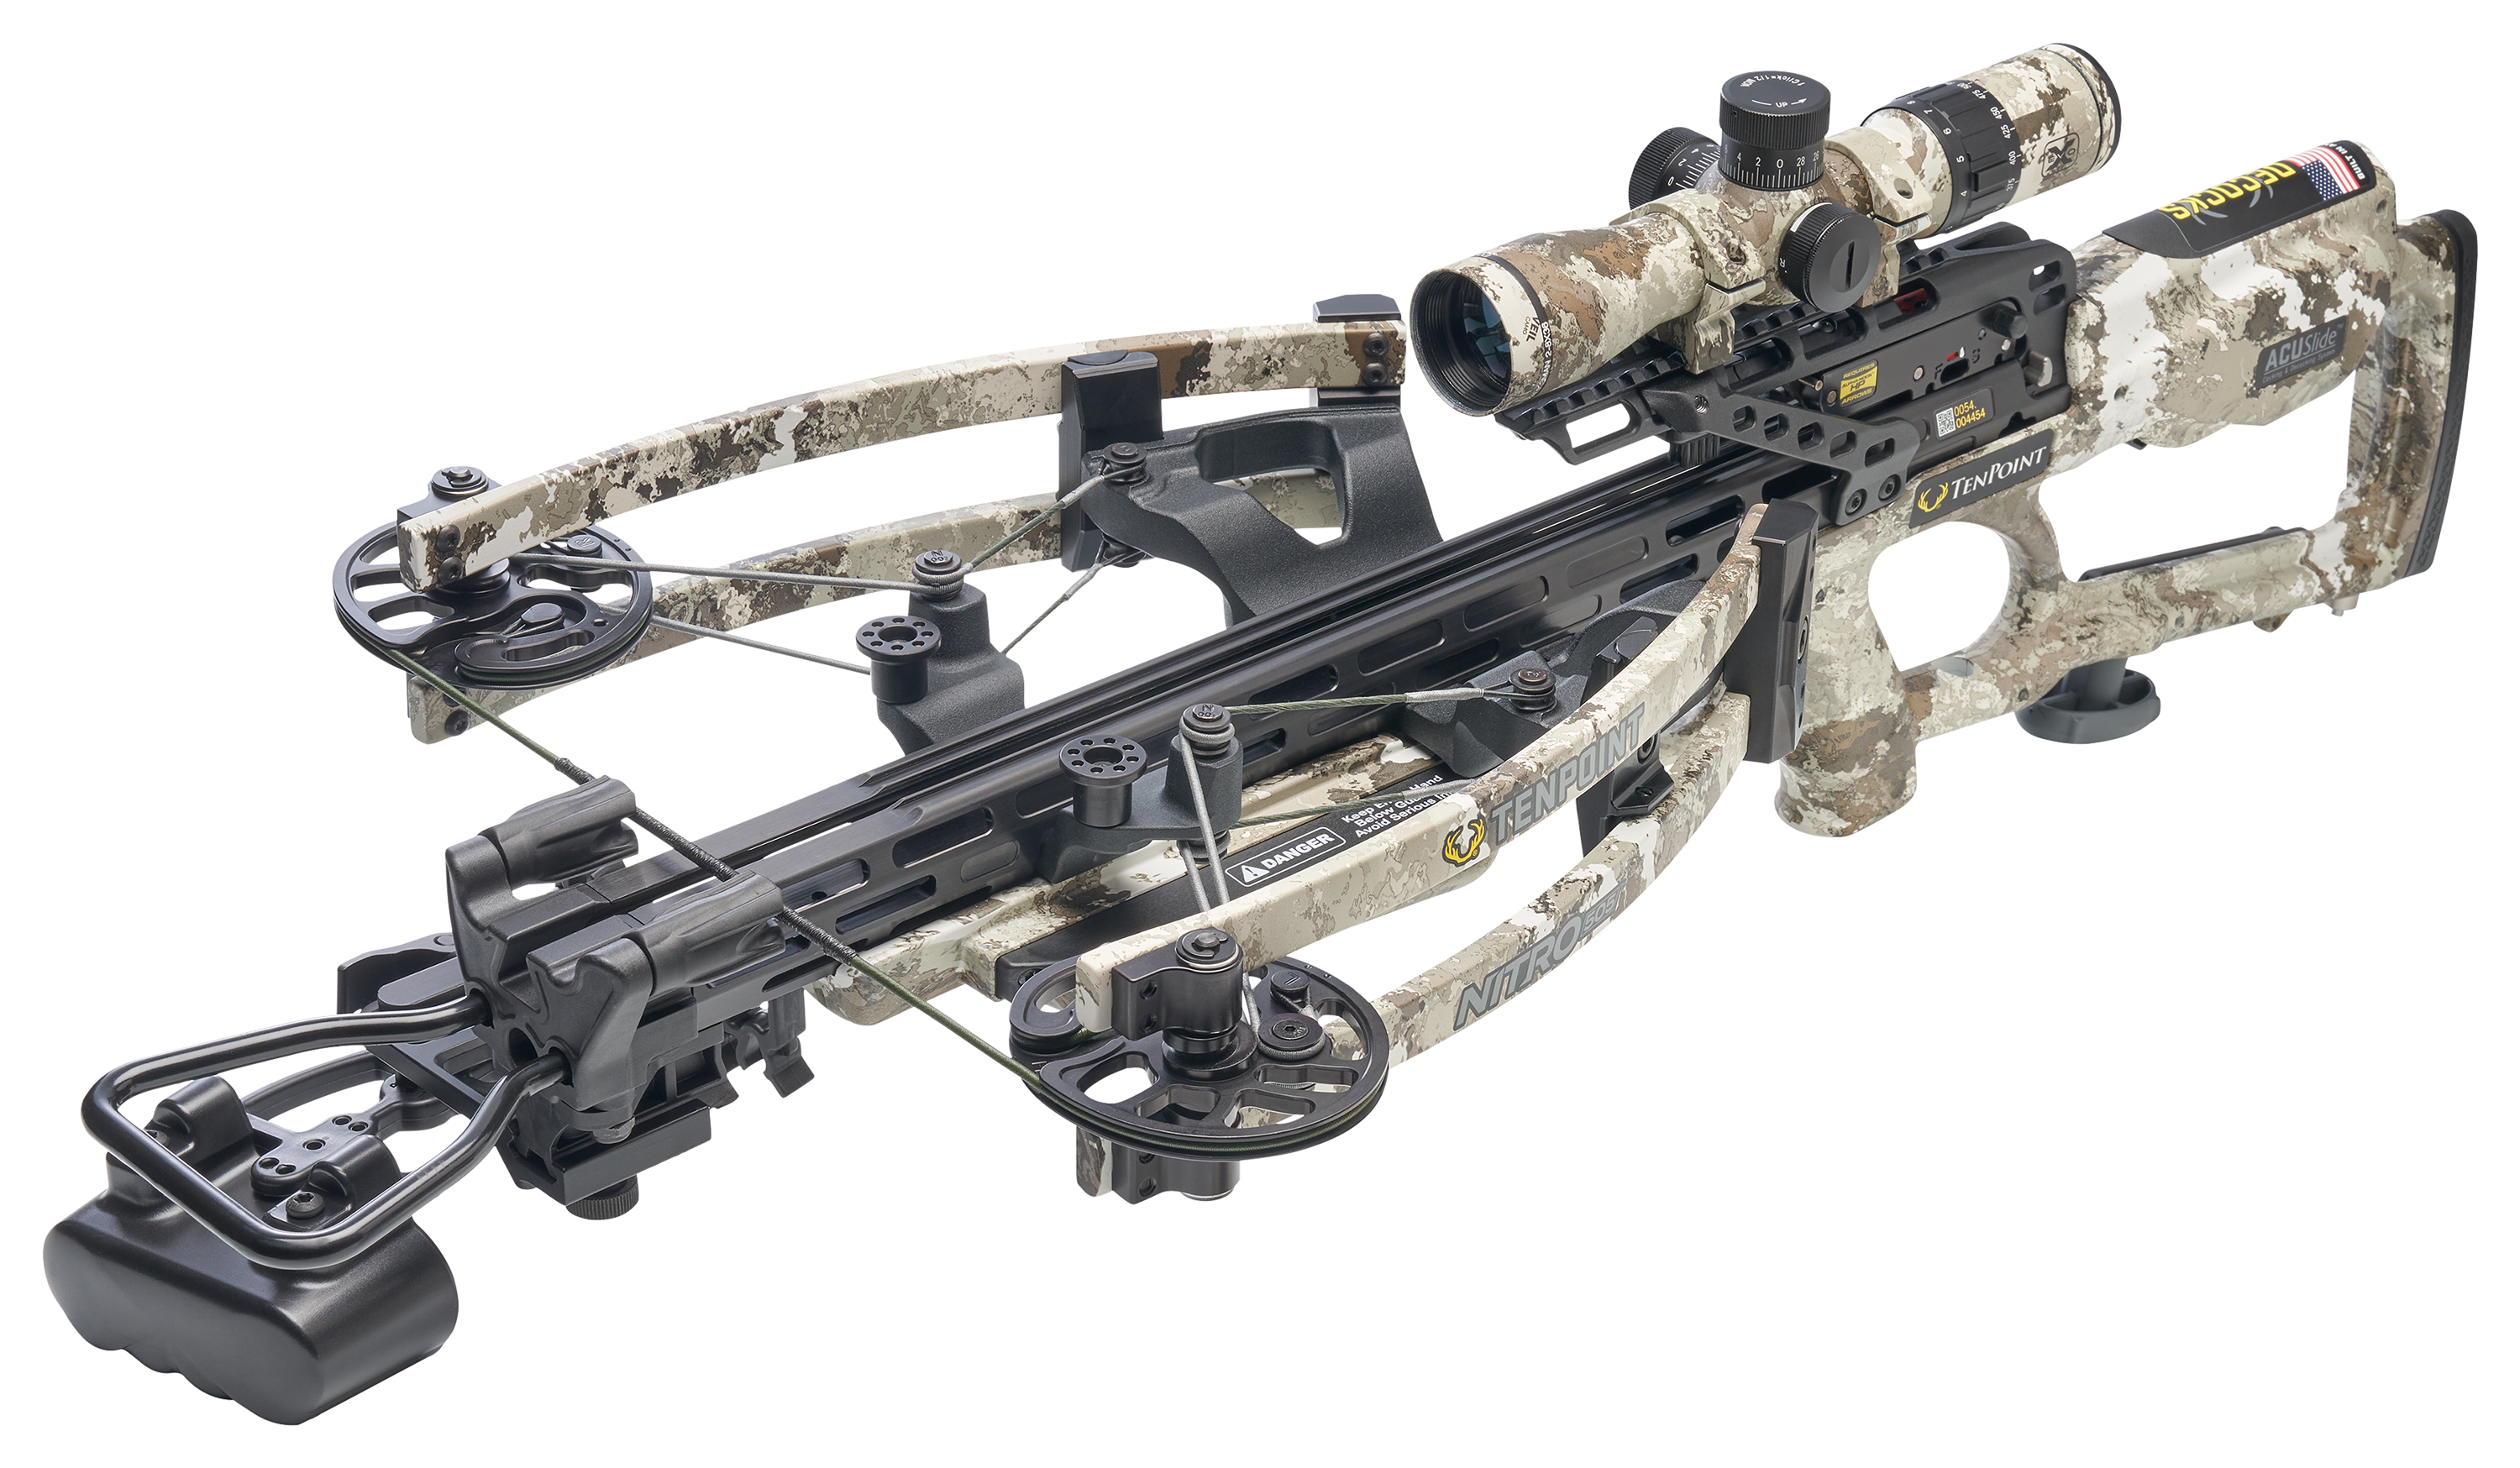 TenPoint Nitro 505 Crossbow Package with ACUSlide